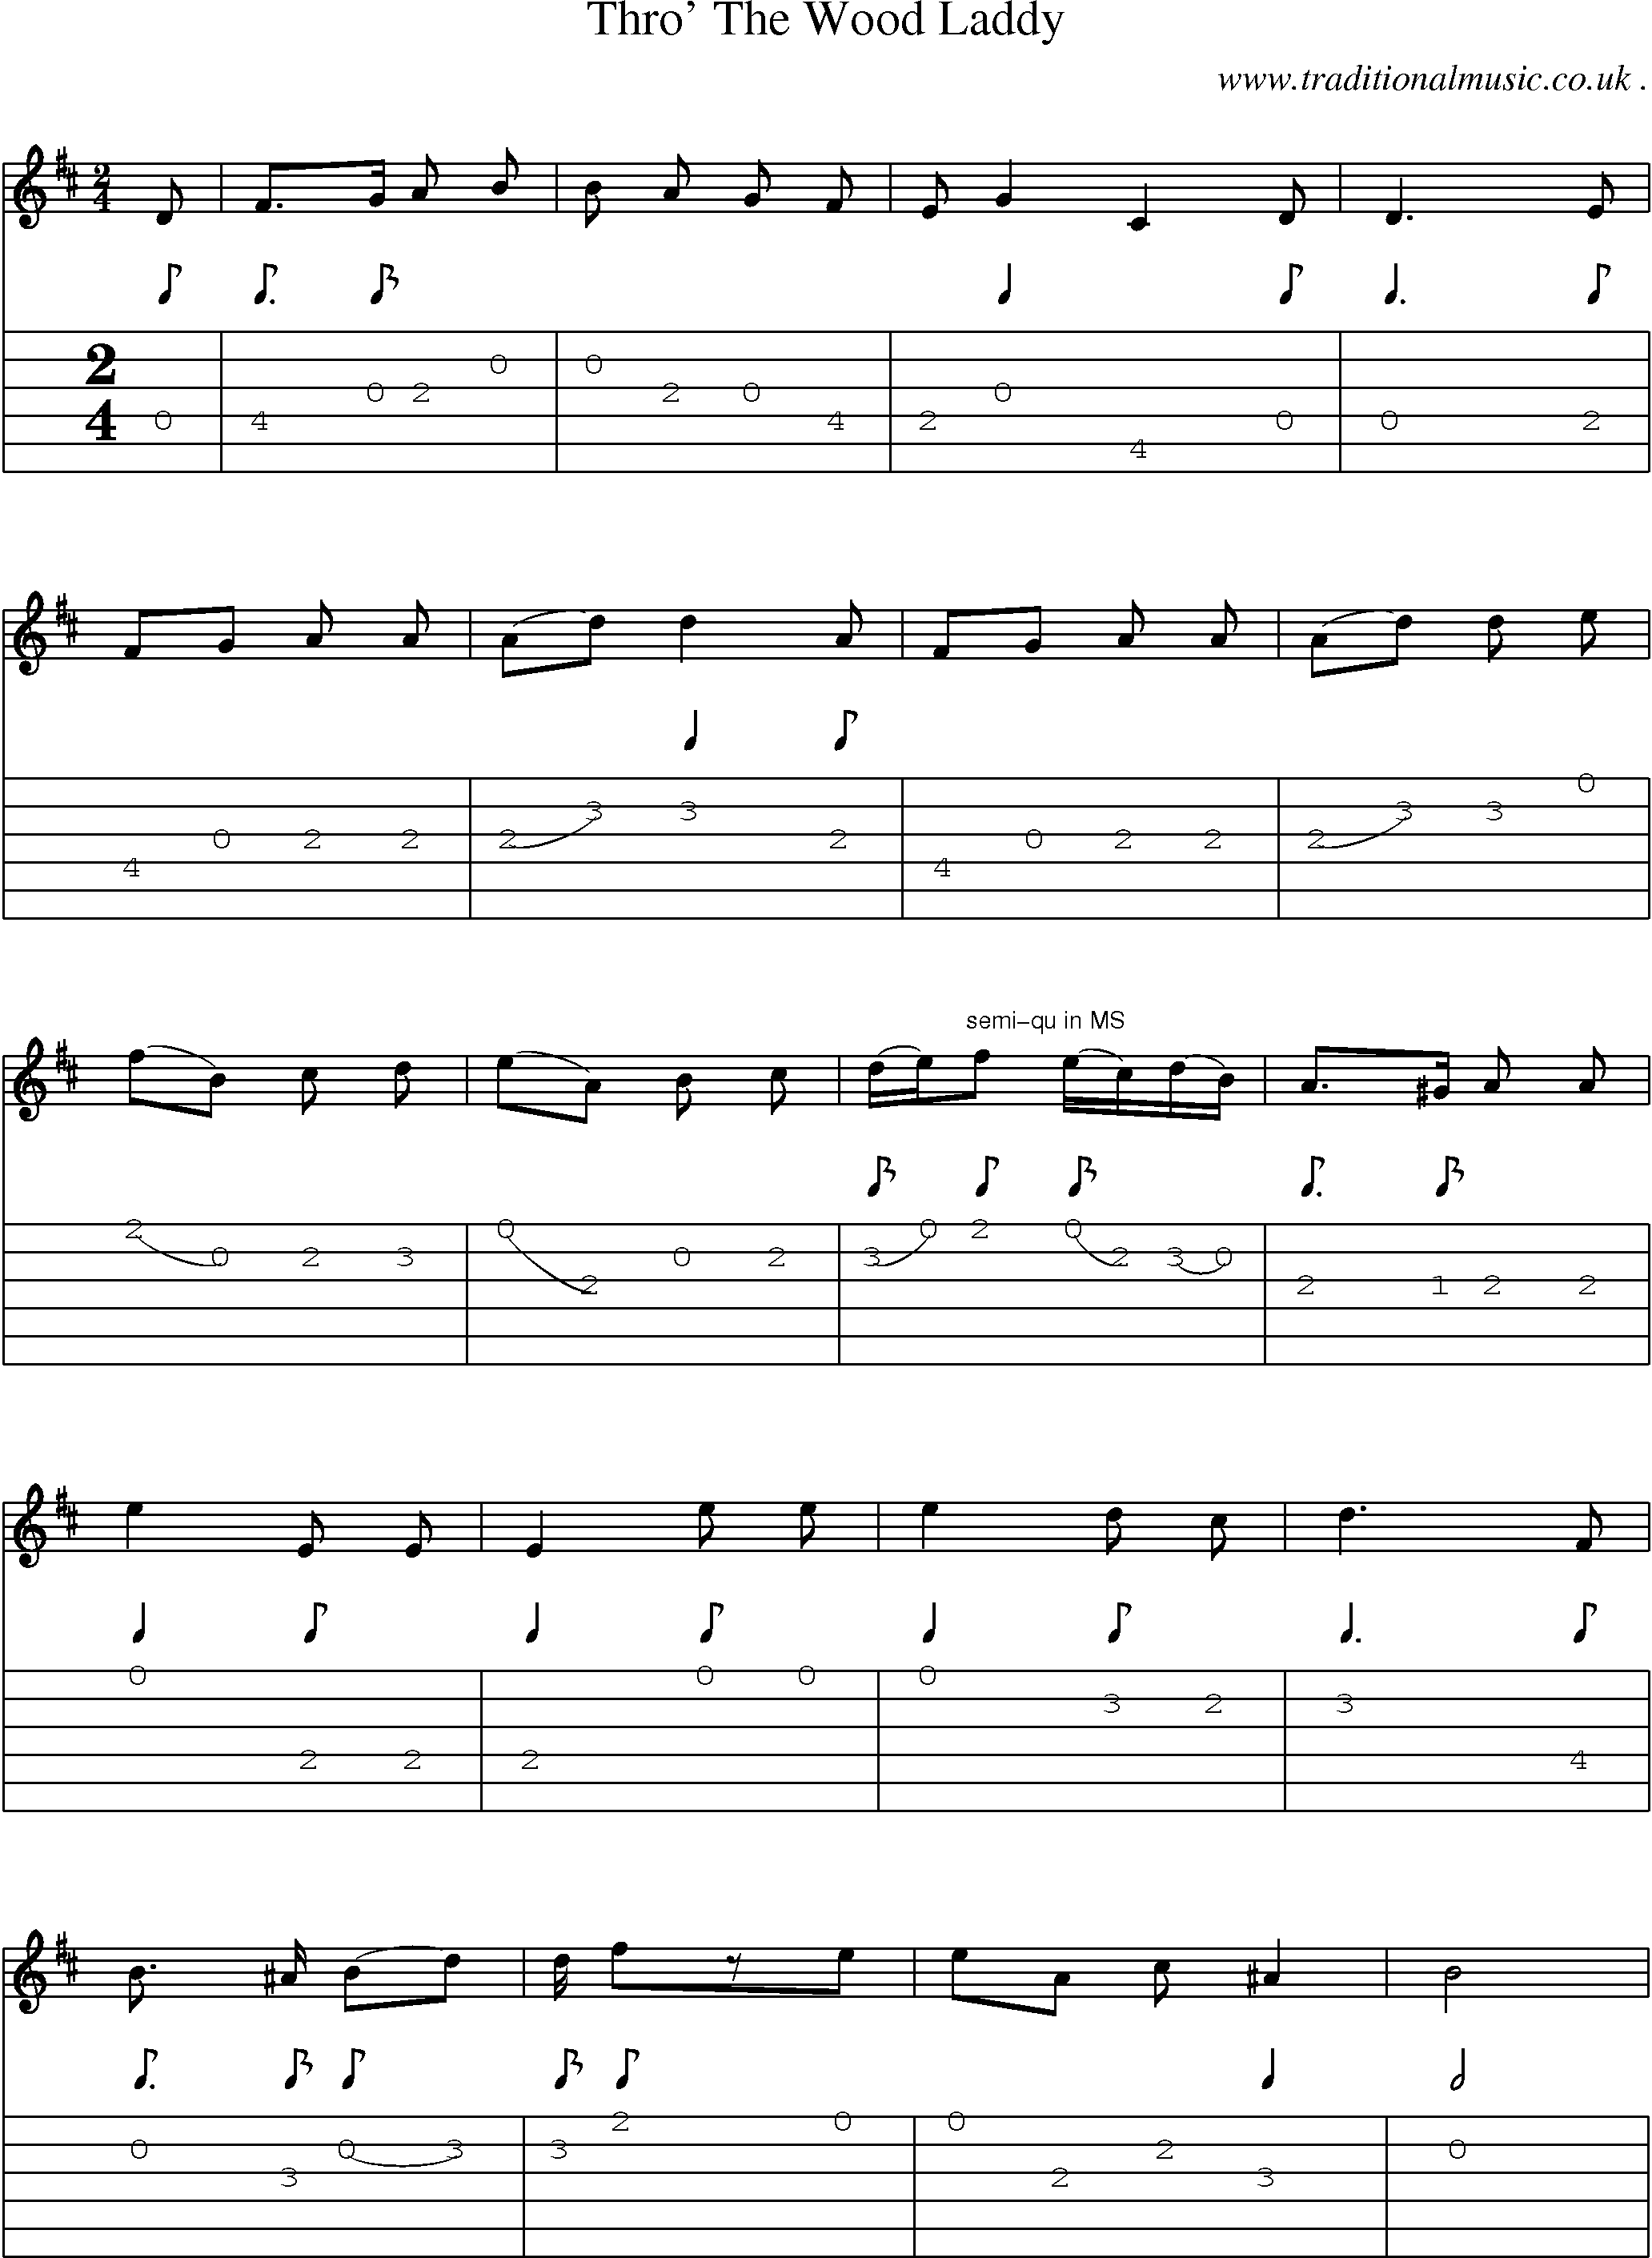 Sheet-Music and Guitar Tabs for Thro The Wood Laddy